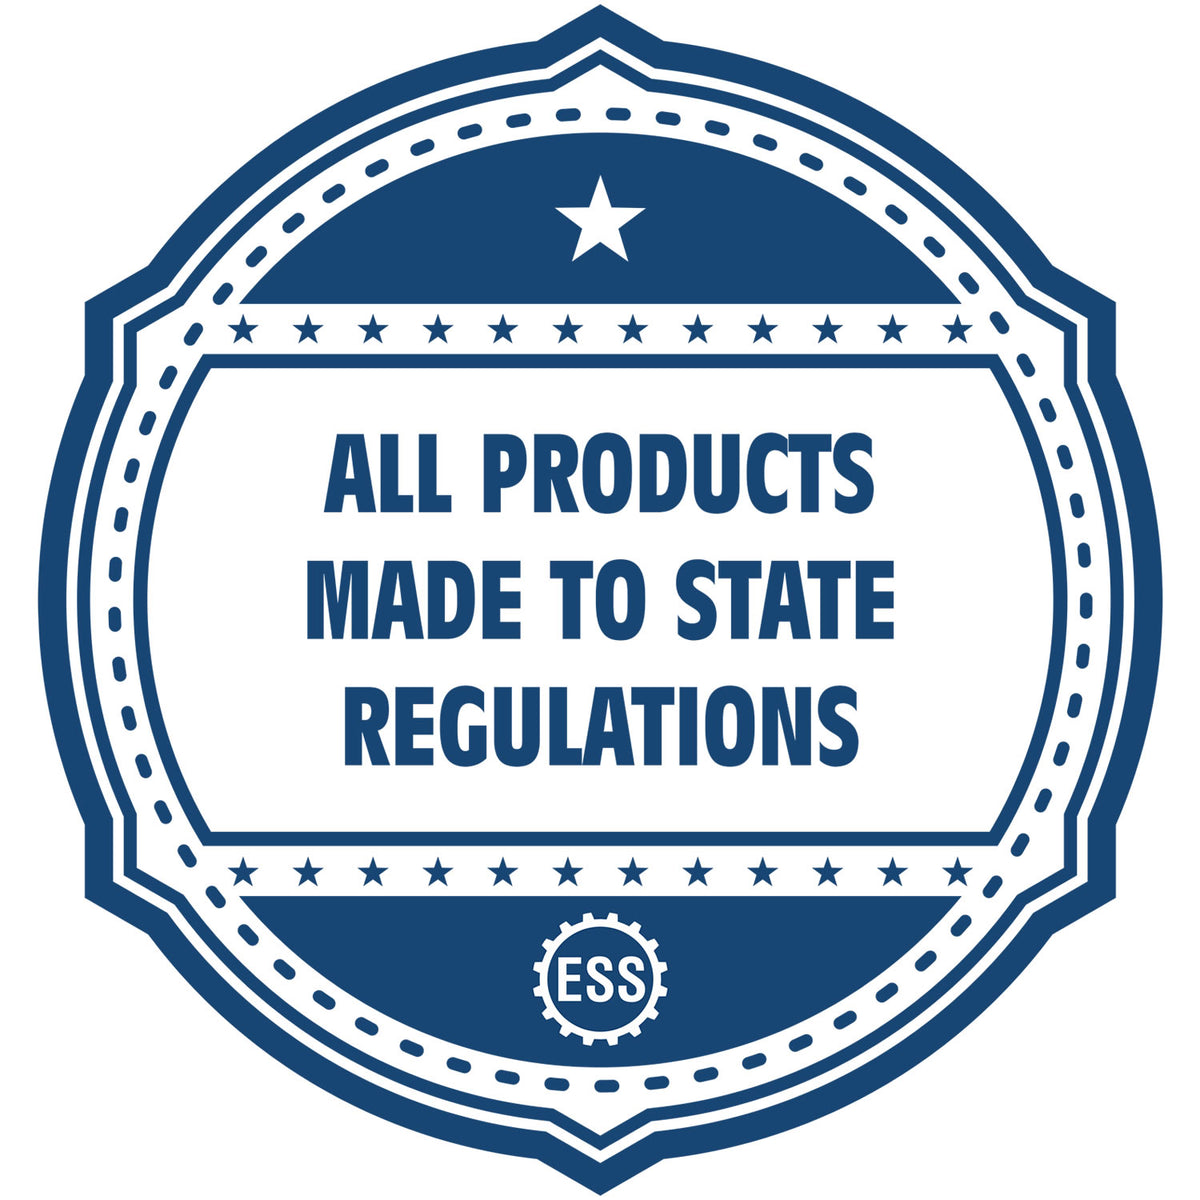 An icon or badge element for the Maryland Desk Architect Embossing Seal showing that this product is made in compliance with state regulations.